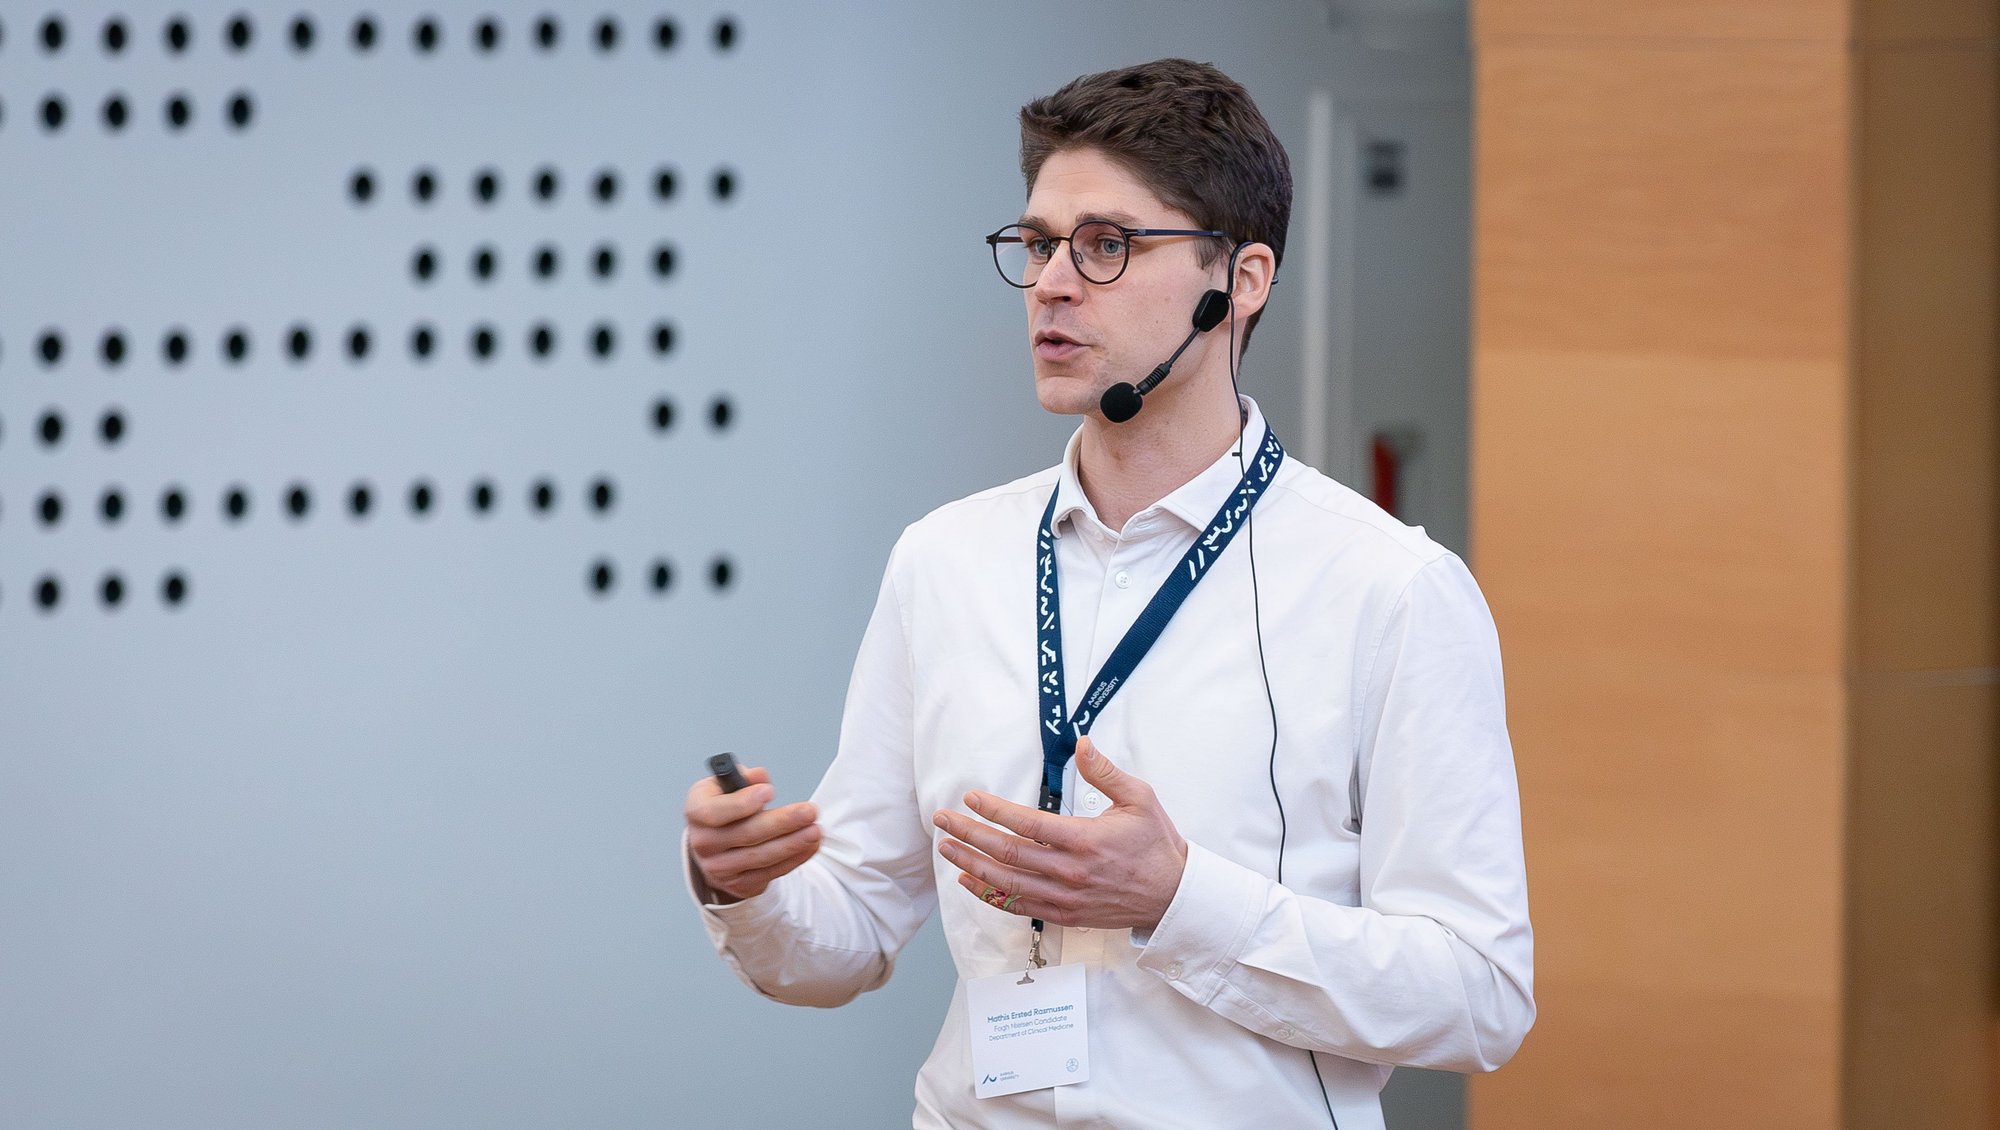 Ph.D. student Mathis Ersted Rasmussen from the Department of Clinical Medicine comes in second place in this year's Fogh-Nielsen competition and receives 25,000 DKK. Photo: Sebastian Skousgaard, AU Health.